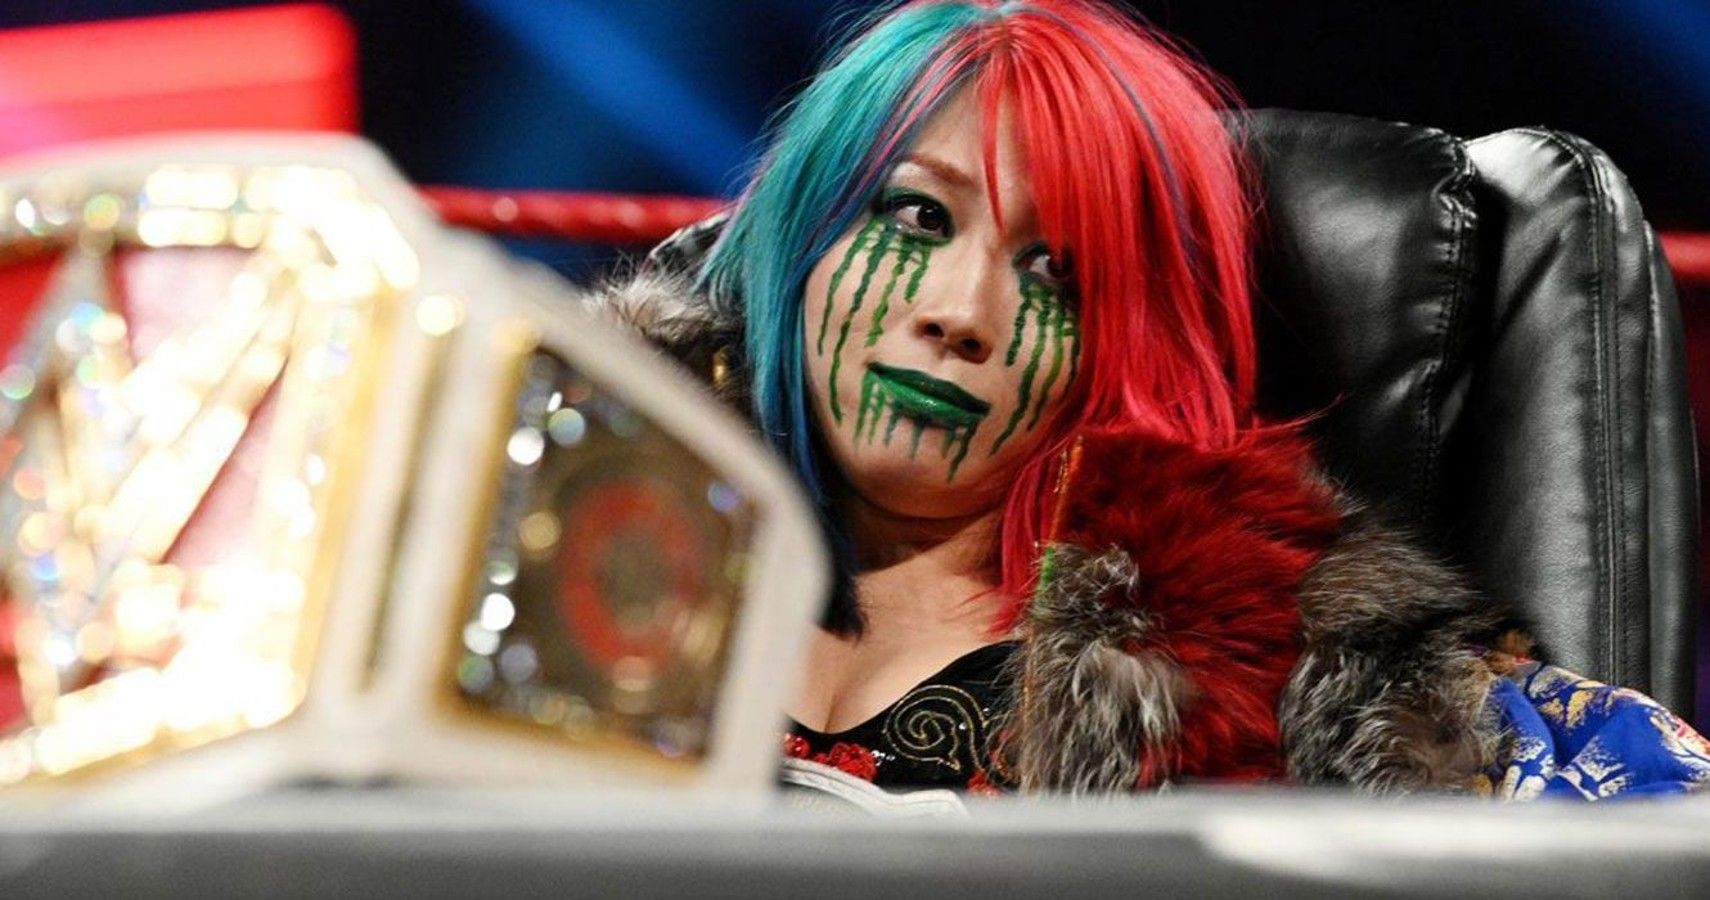 Asuka Has Been A Champion In WWE For Over 1000 Days.